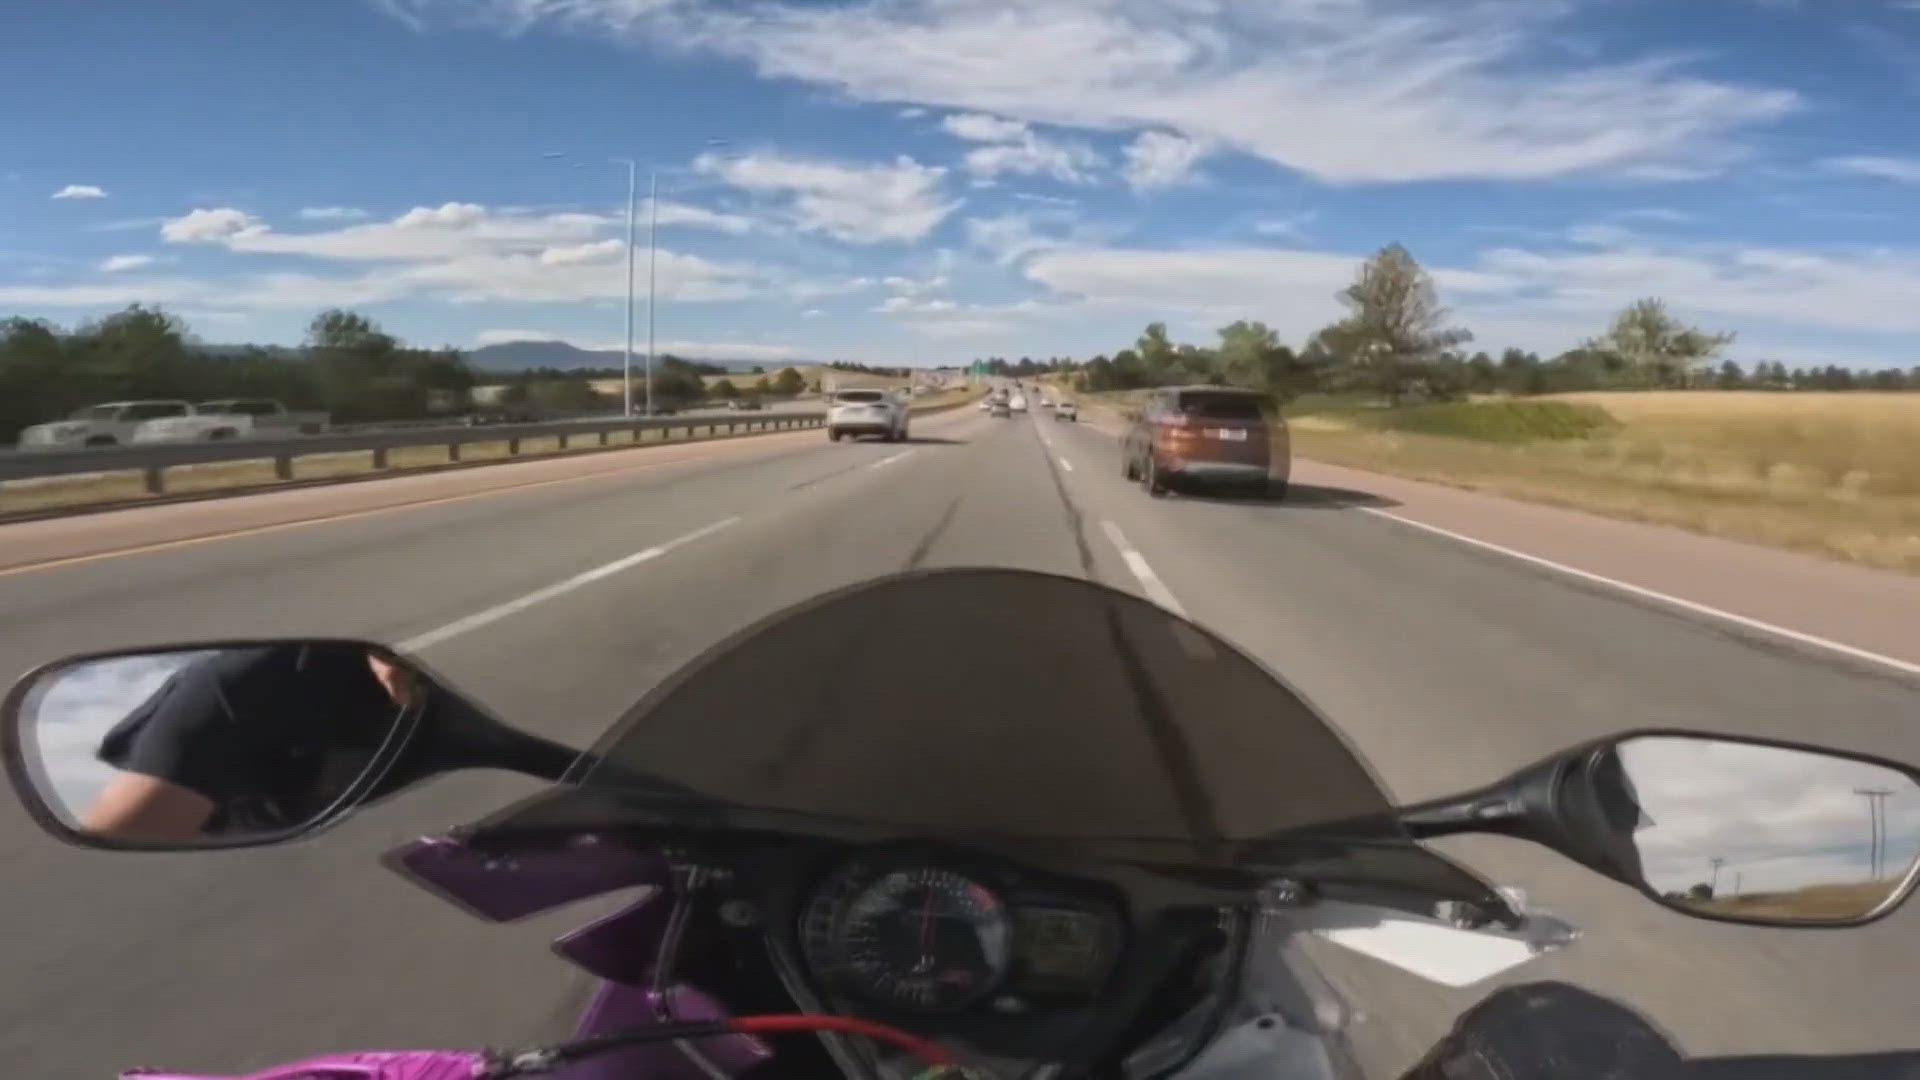 The motorcyclist who recorded himself driving 150 mph on I-25 between Colorado Springs and Denver pleaded guilty and was sentenced Tuesday.